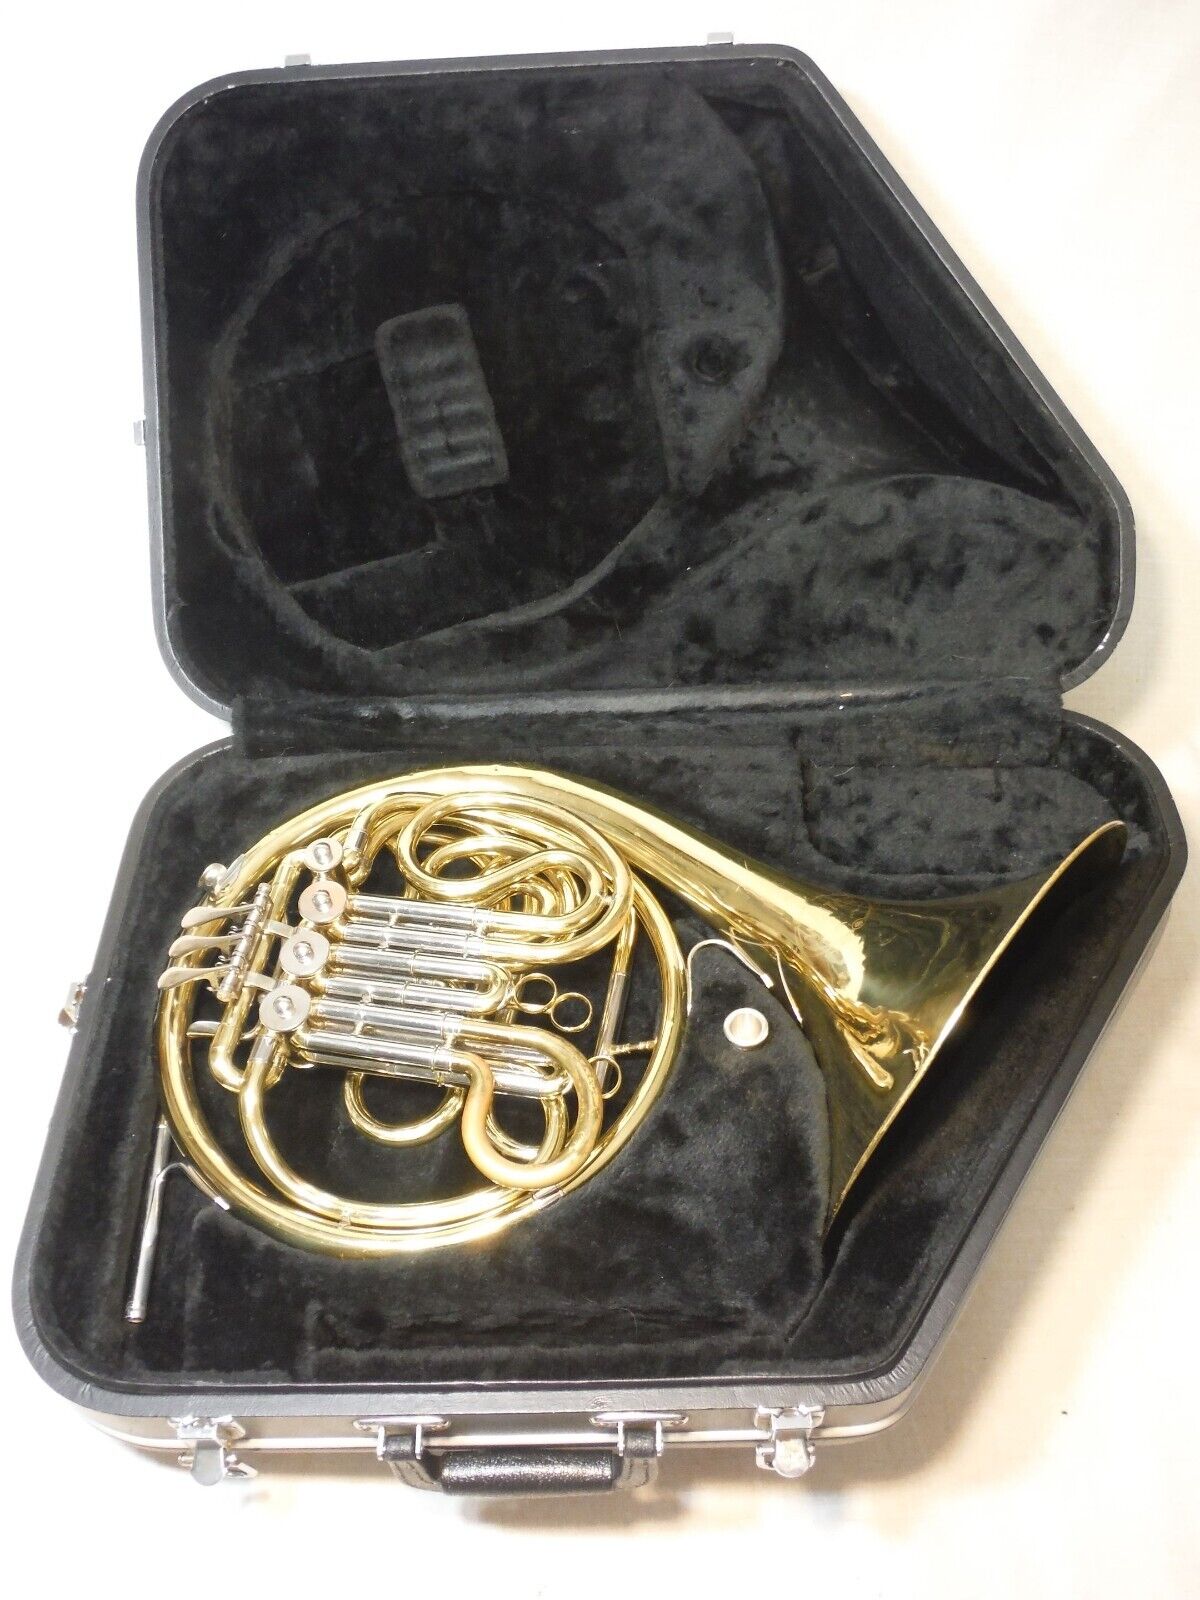 JUPITER JHR-852 DOUBLE FRENCH HORN BRASS WORKING GOOD W/DENTS CASE MOUTHPIECE 23